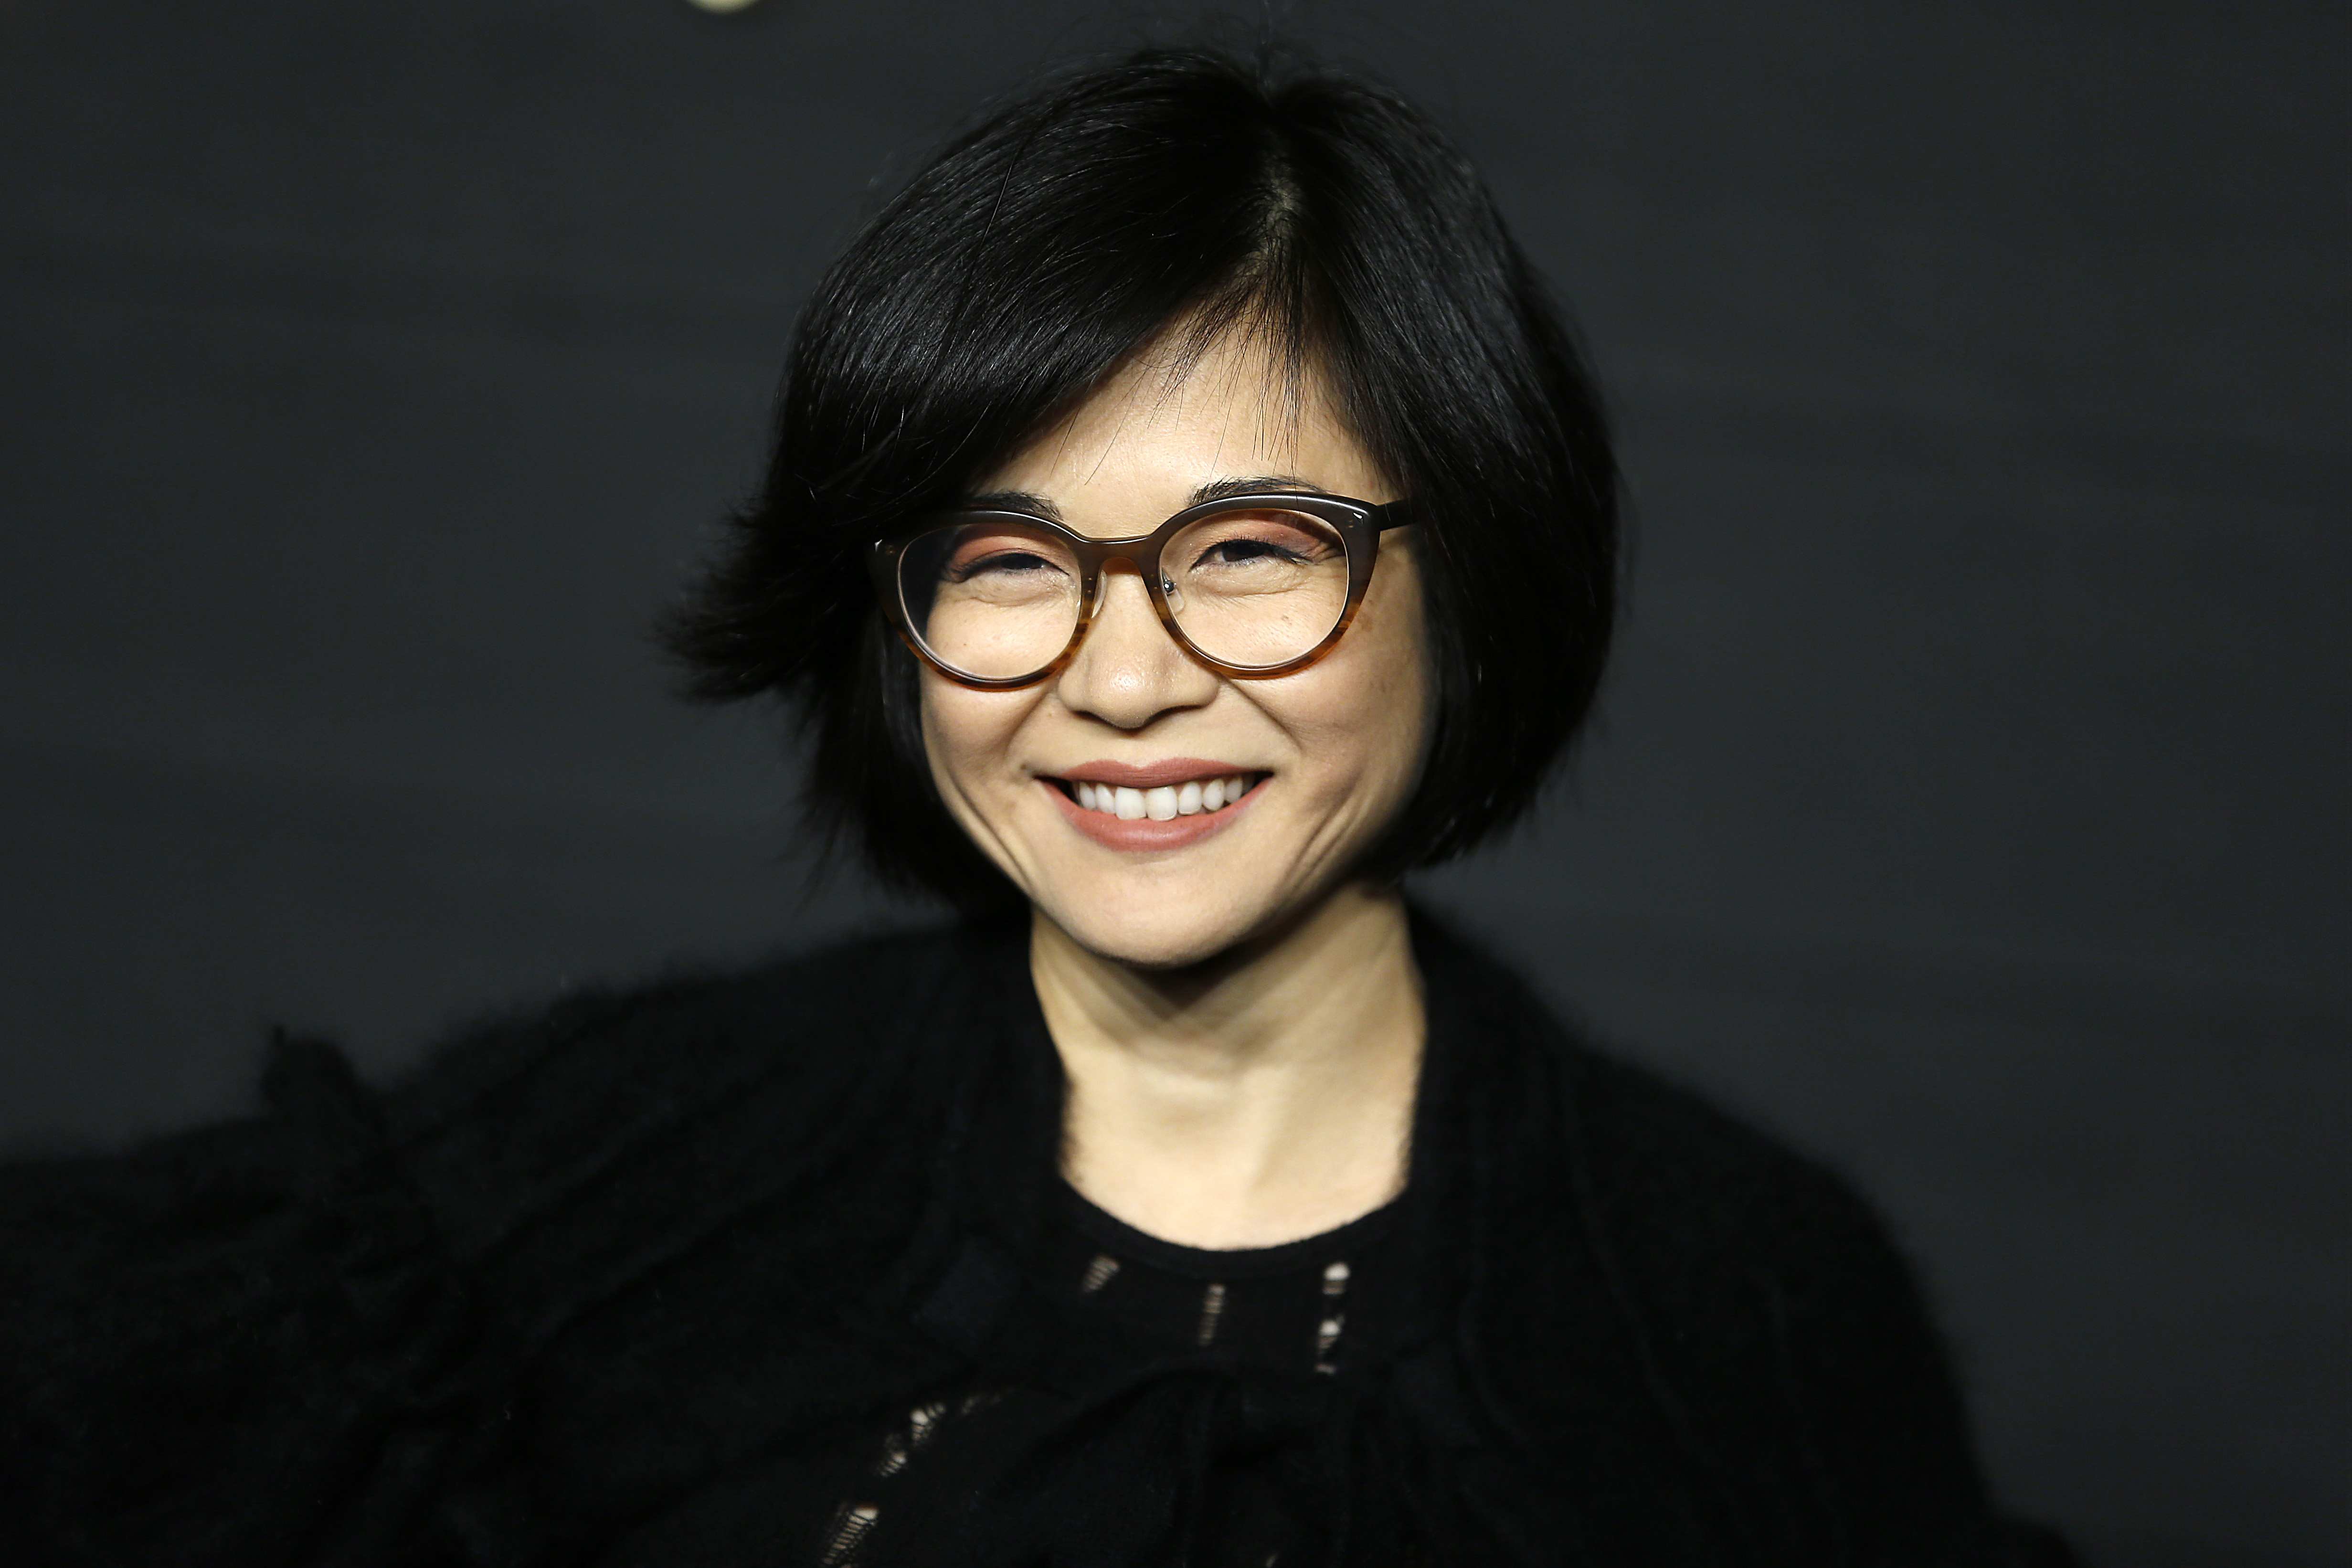 NEW YORK, NEW YORK - OCTOBER 17: Keiko Agena attends "Dickinson" New York Premiere at St. Ann's Warehouse on October 17, 2019 in New York City.